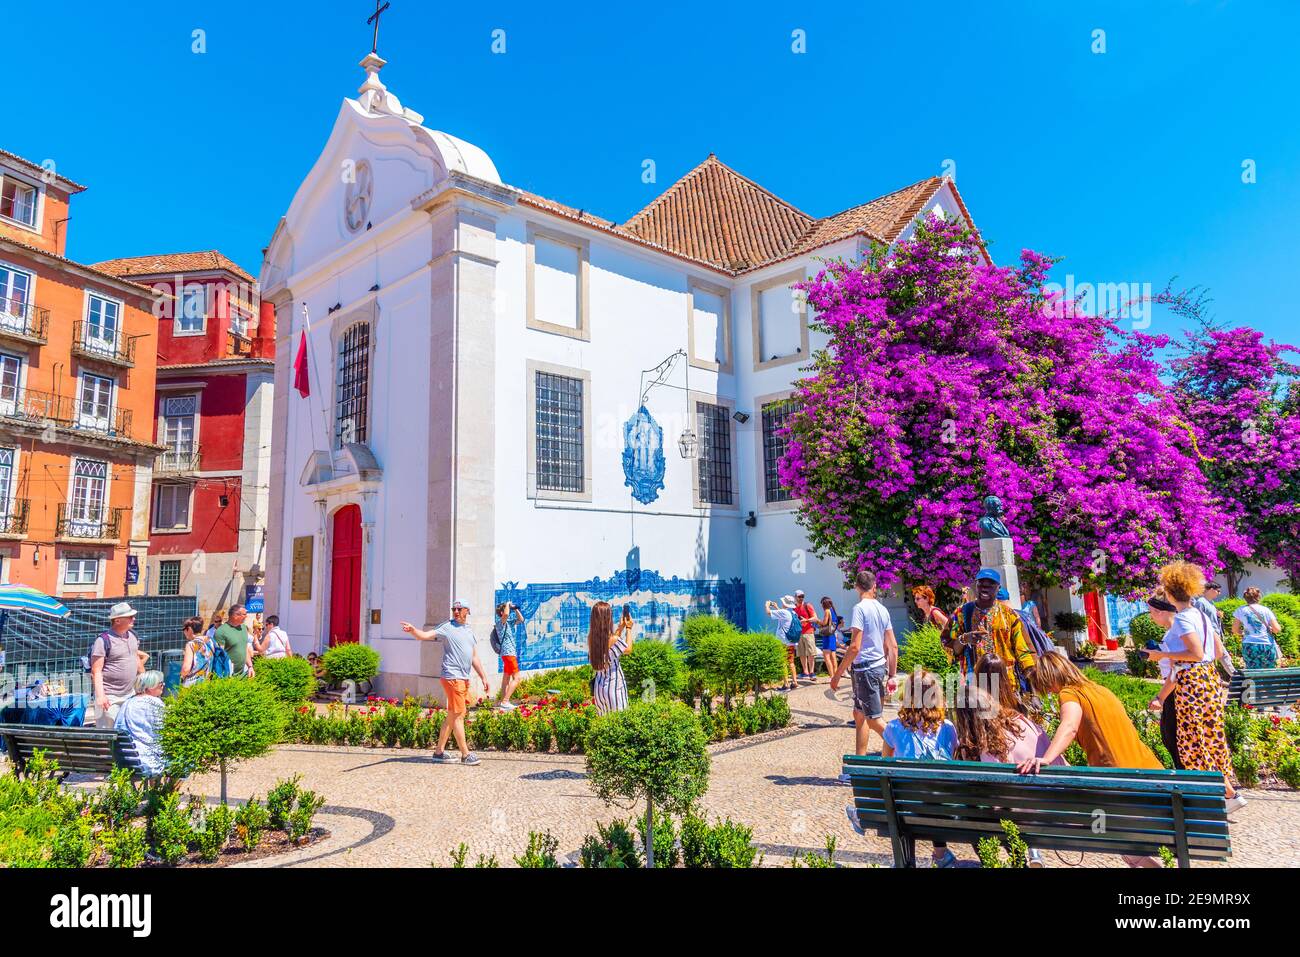 LISBON, PORTUGAL, JUNE 1, 2019:  People are passing by Santa Luzia church in Lisbon, Portugal Stock Photo